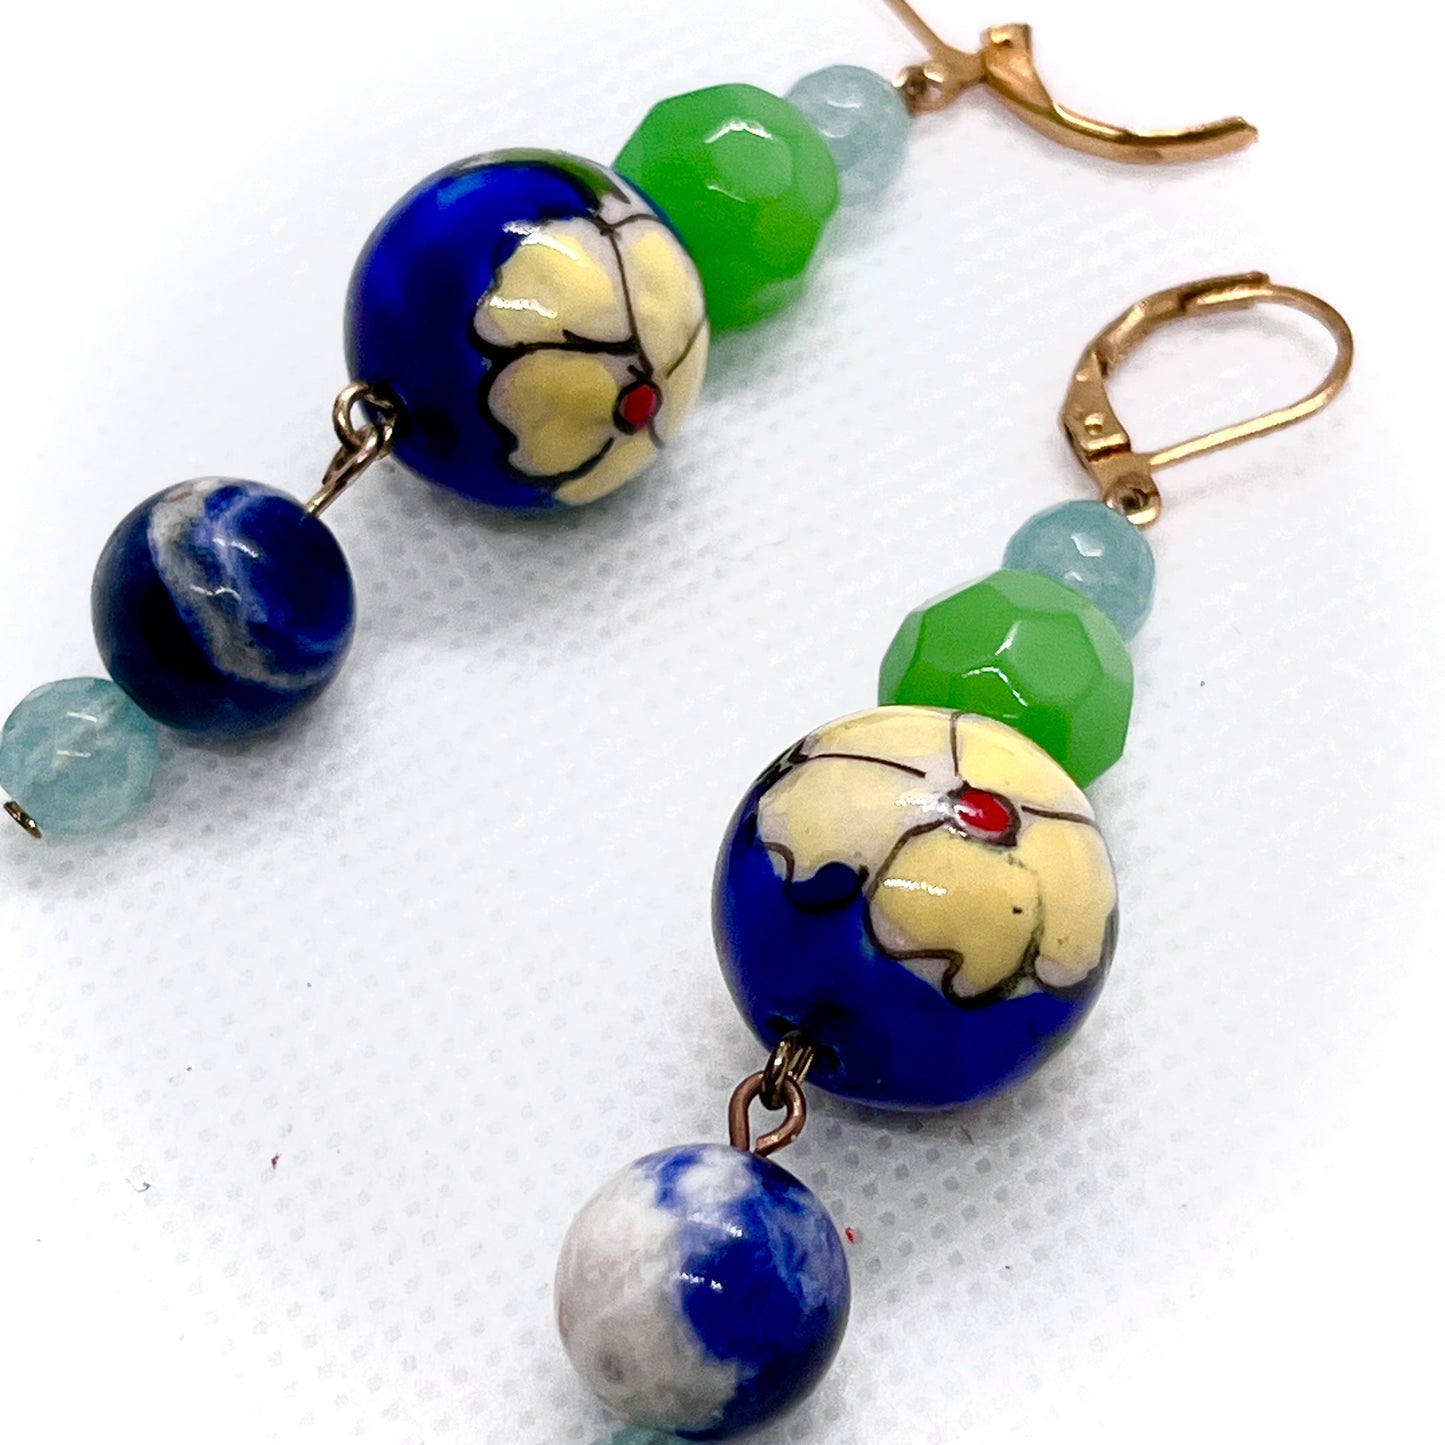 Painted China Earrings